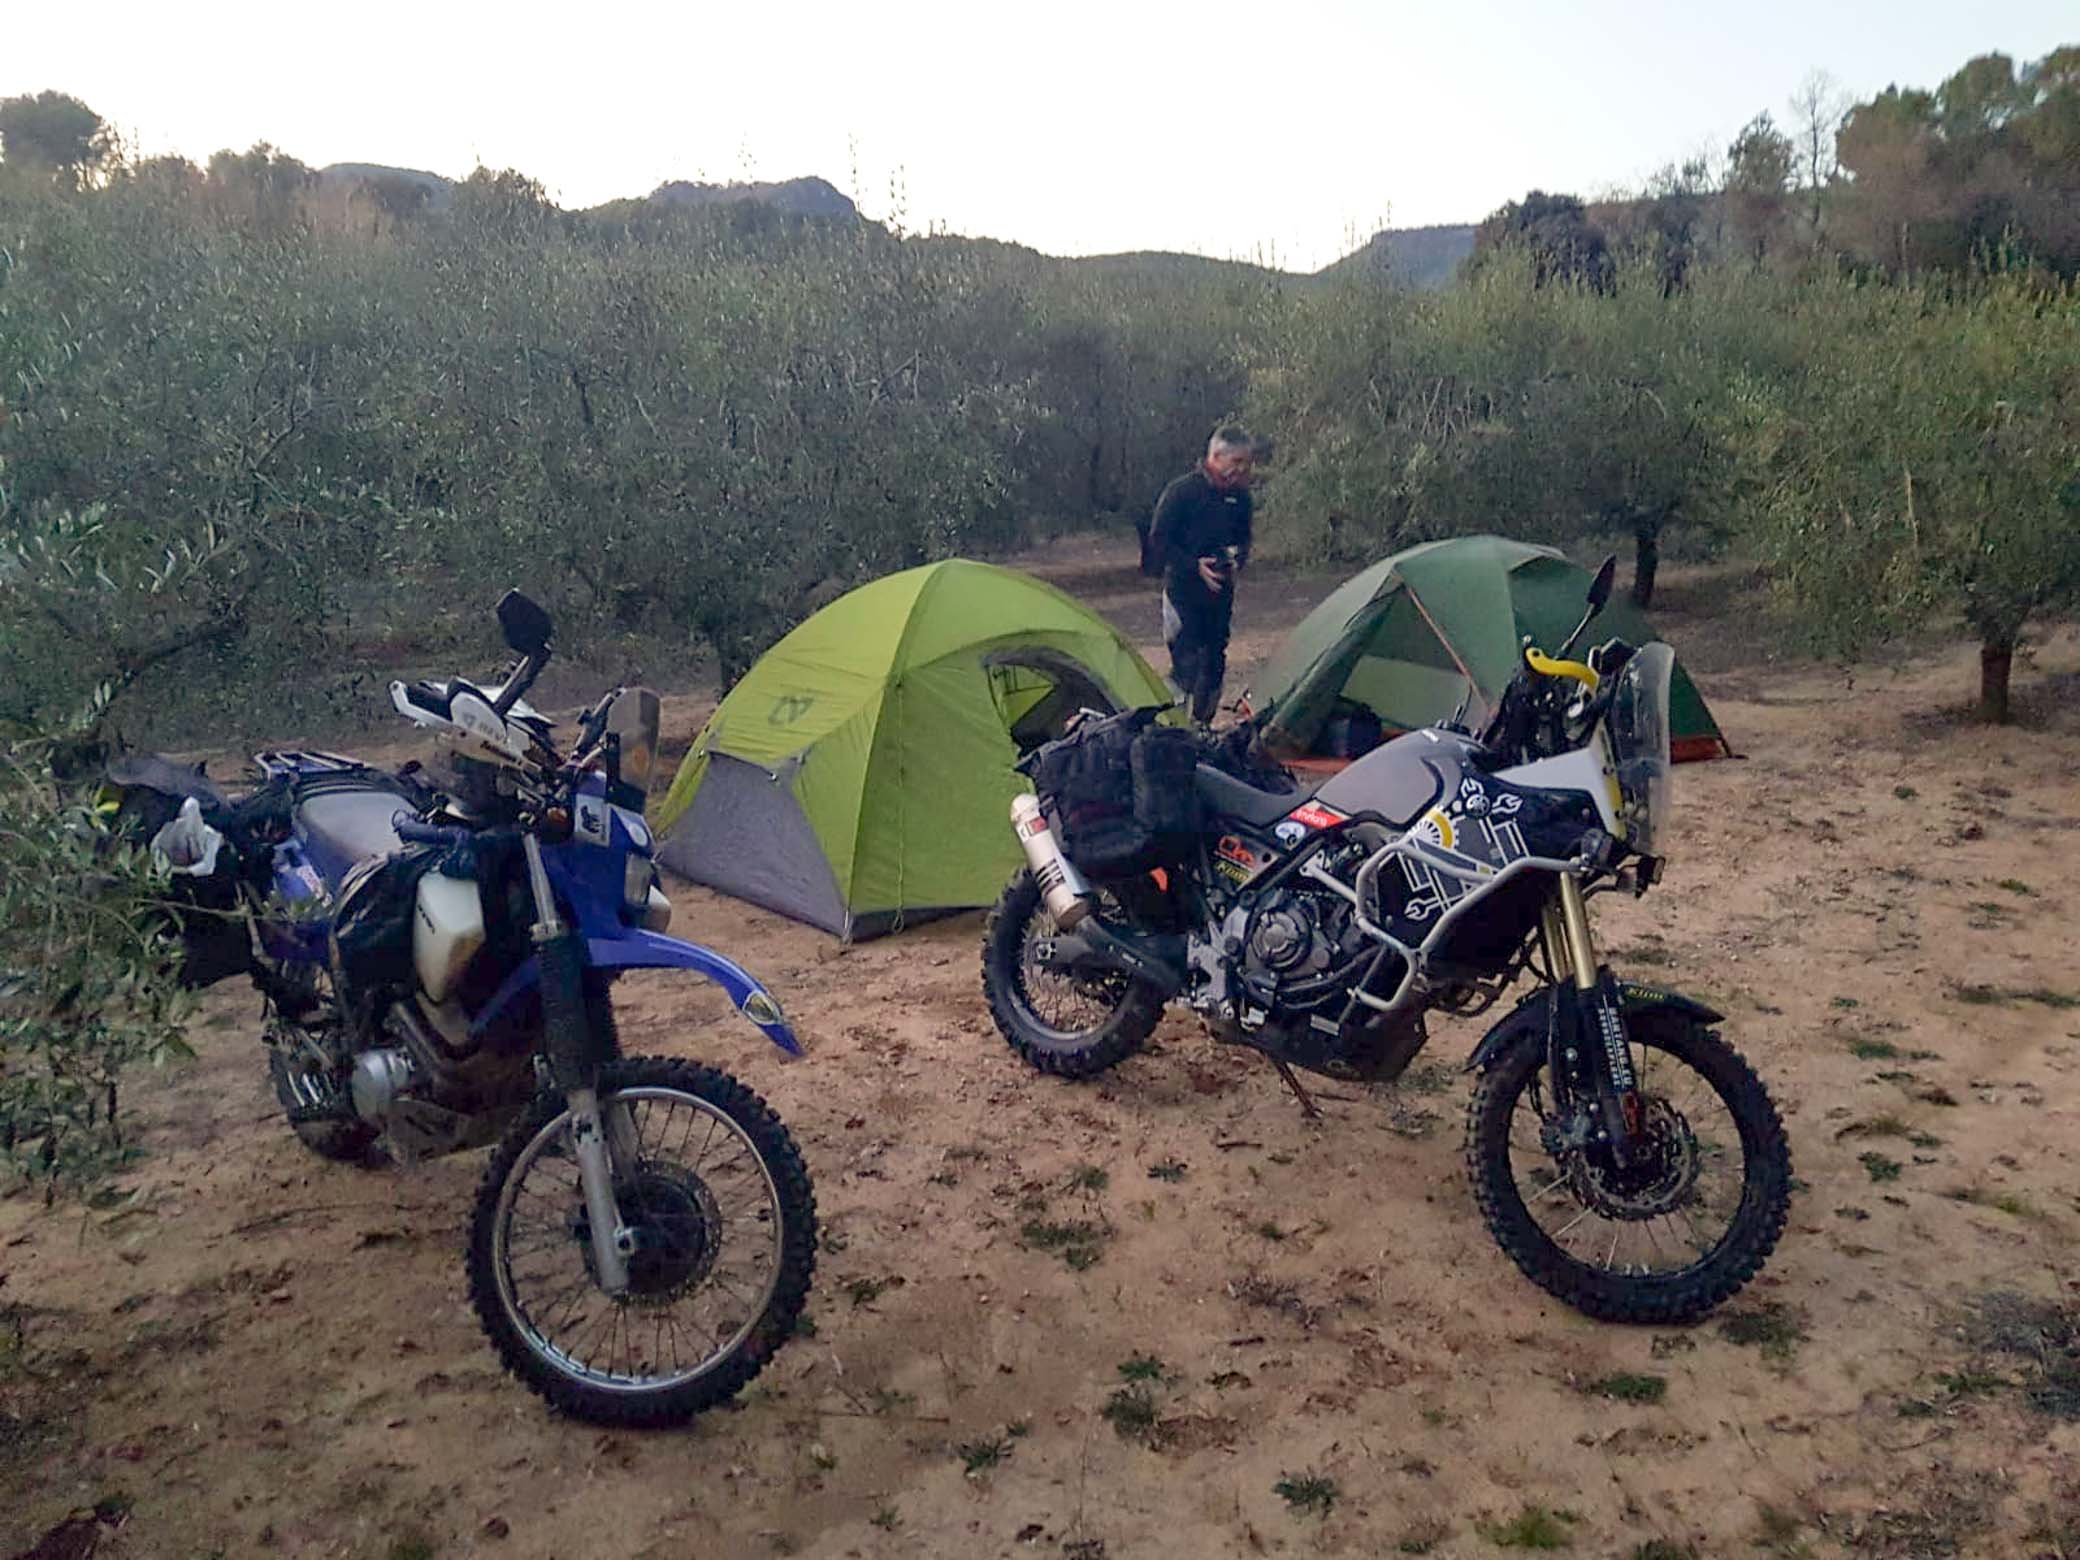 Wild camping on an adventure motorcycle trip using the duffel bags and soft luggage